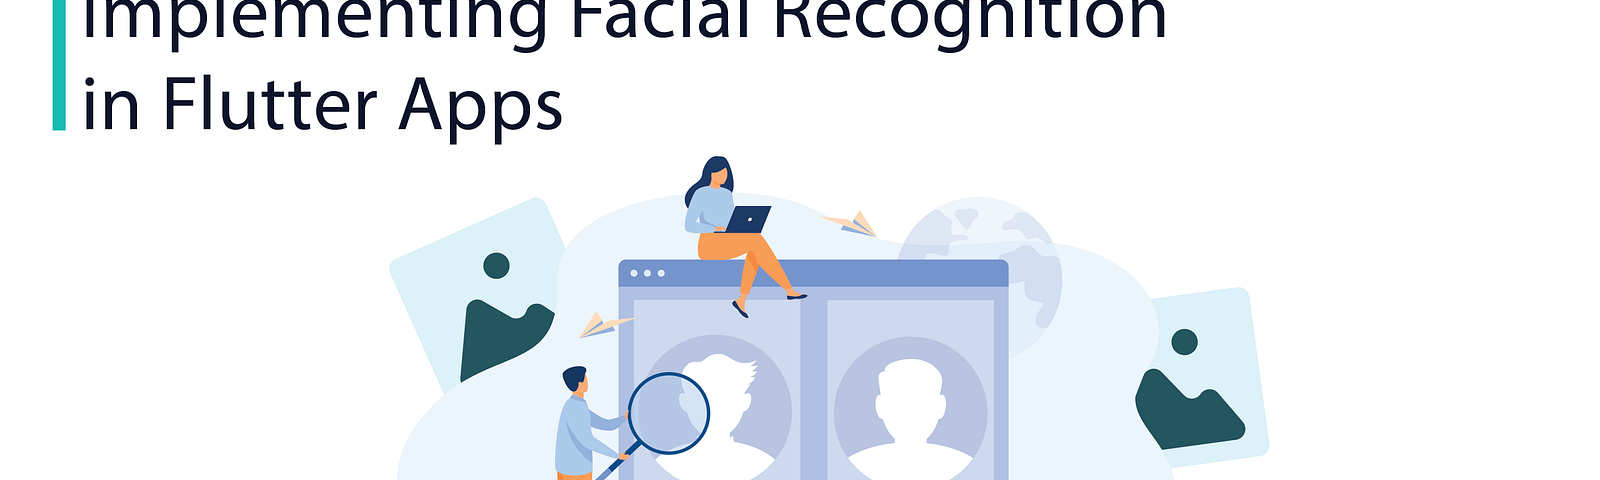 Implementing Facial Recognition in Flutter Apps